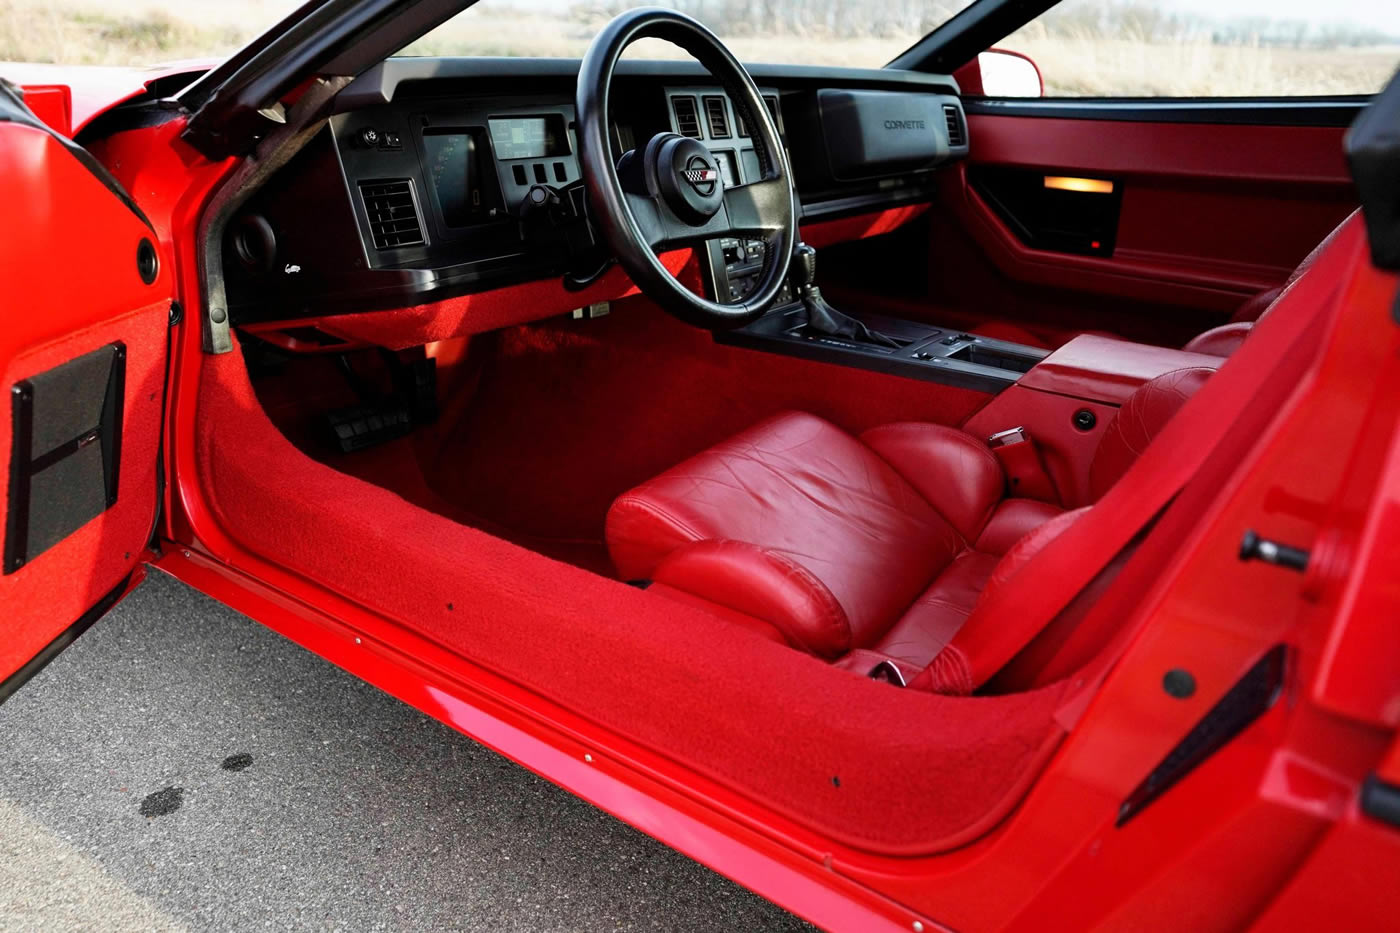 1989 Corvette Coupe in Bright Red with Red Interior